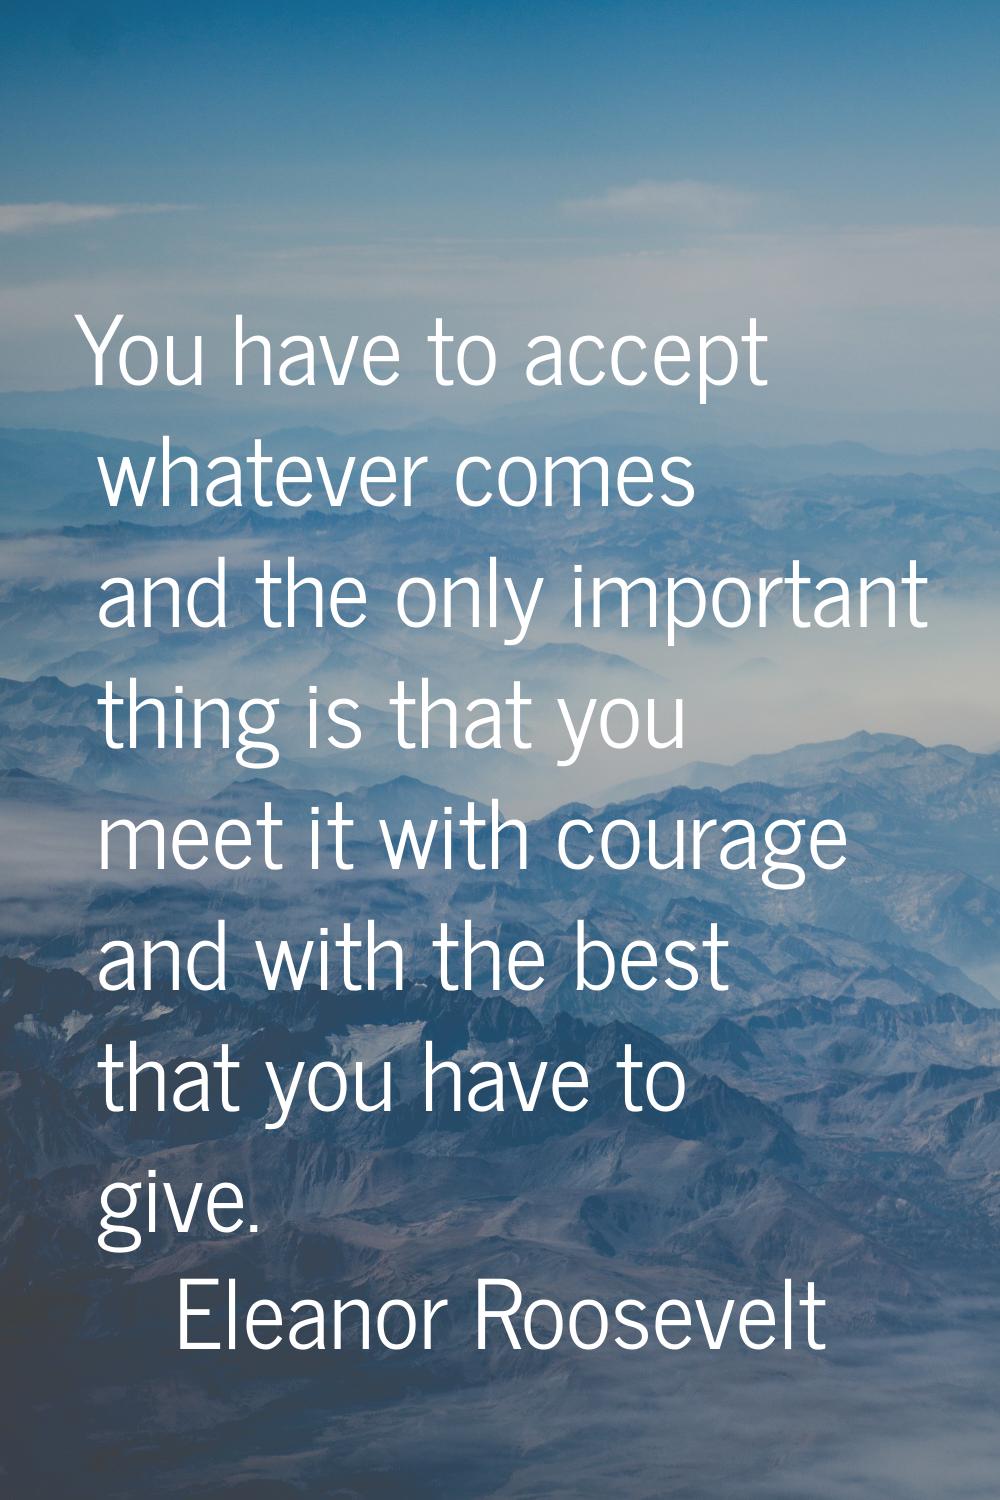 You have to accept whatever comes and the only important thing is that you meet it with courage and